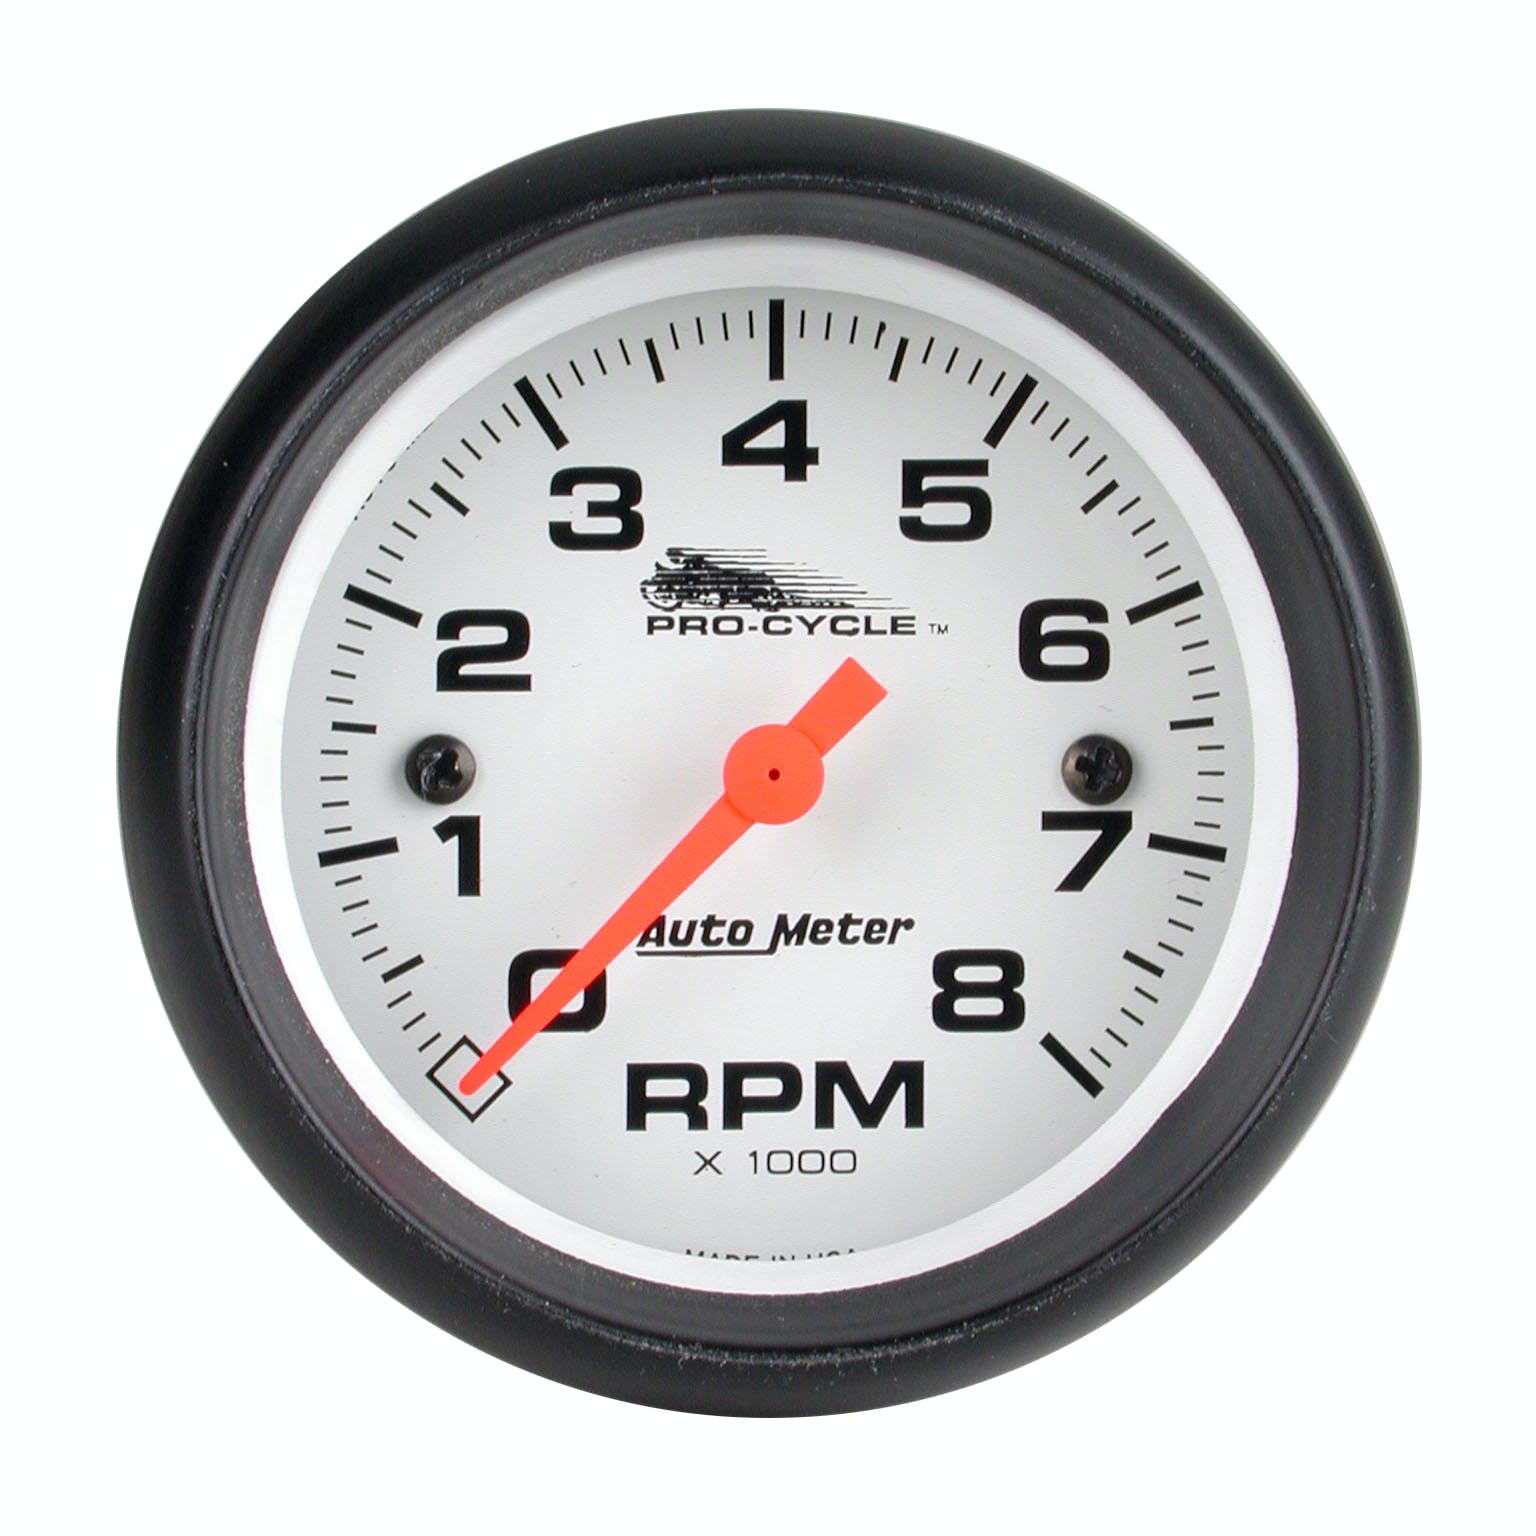 AutoMeter Products 19325 Tachometer Gauge, White-Pro Cycle 2 5/8, 8000 RPM